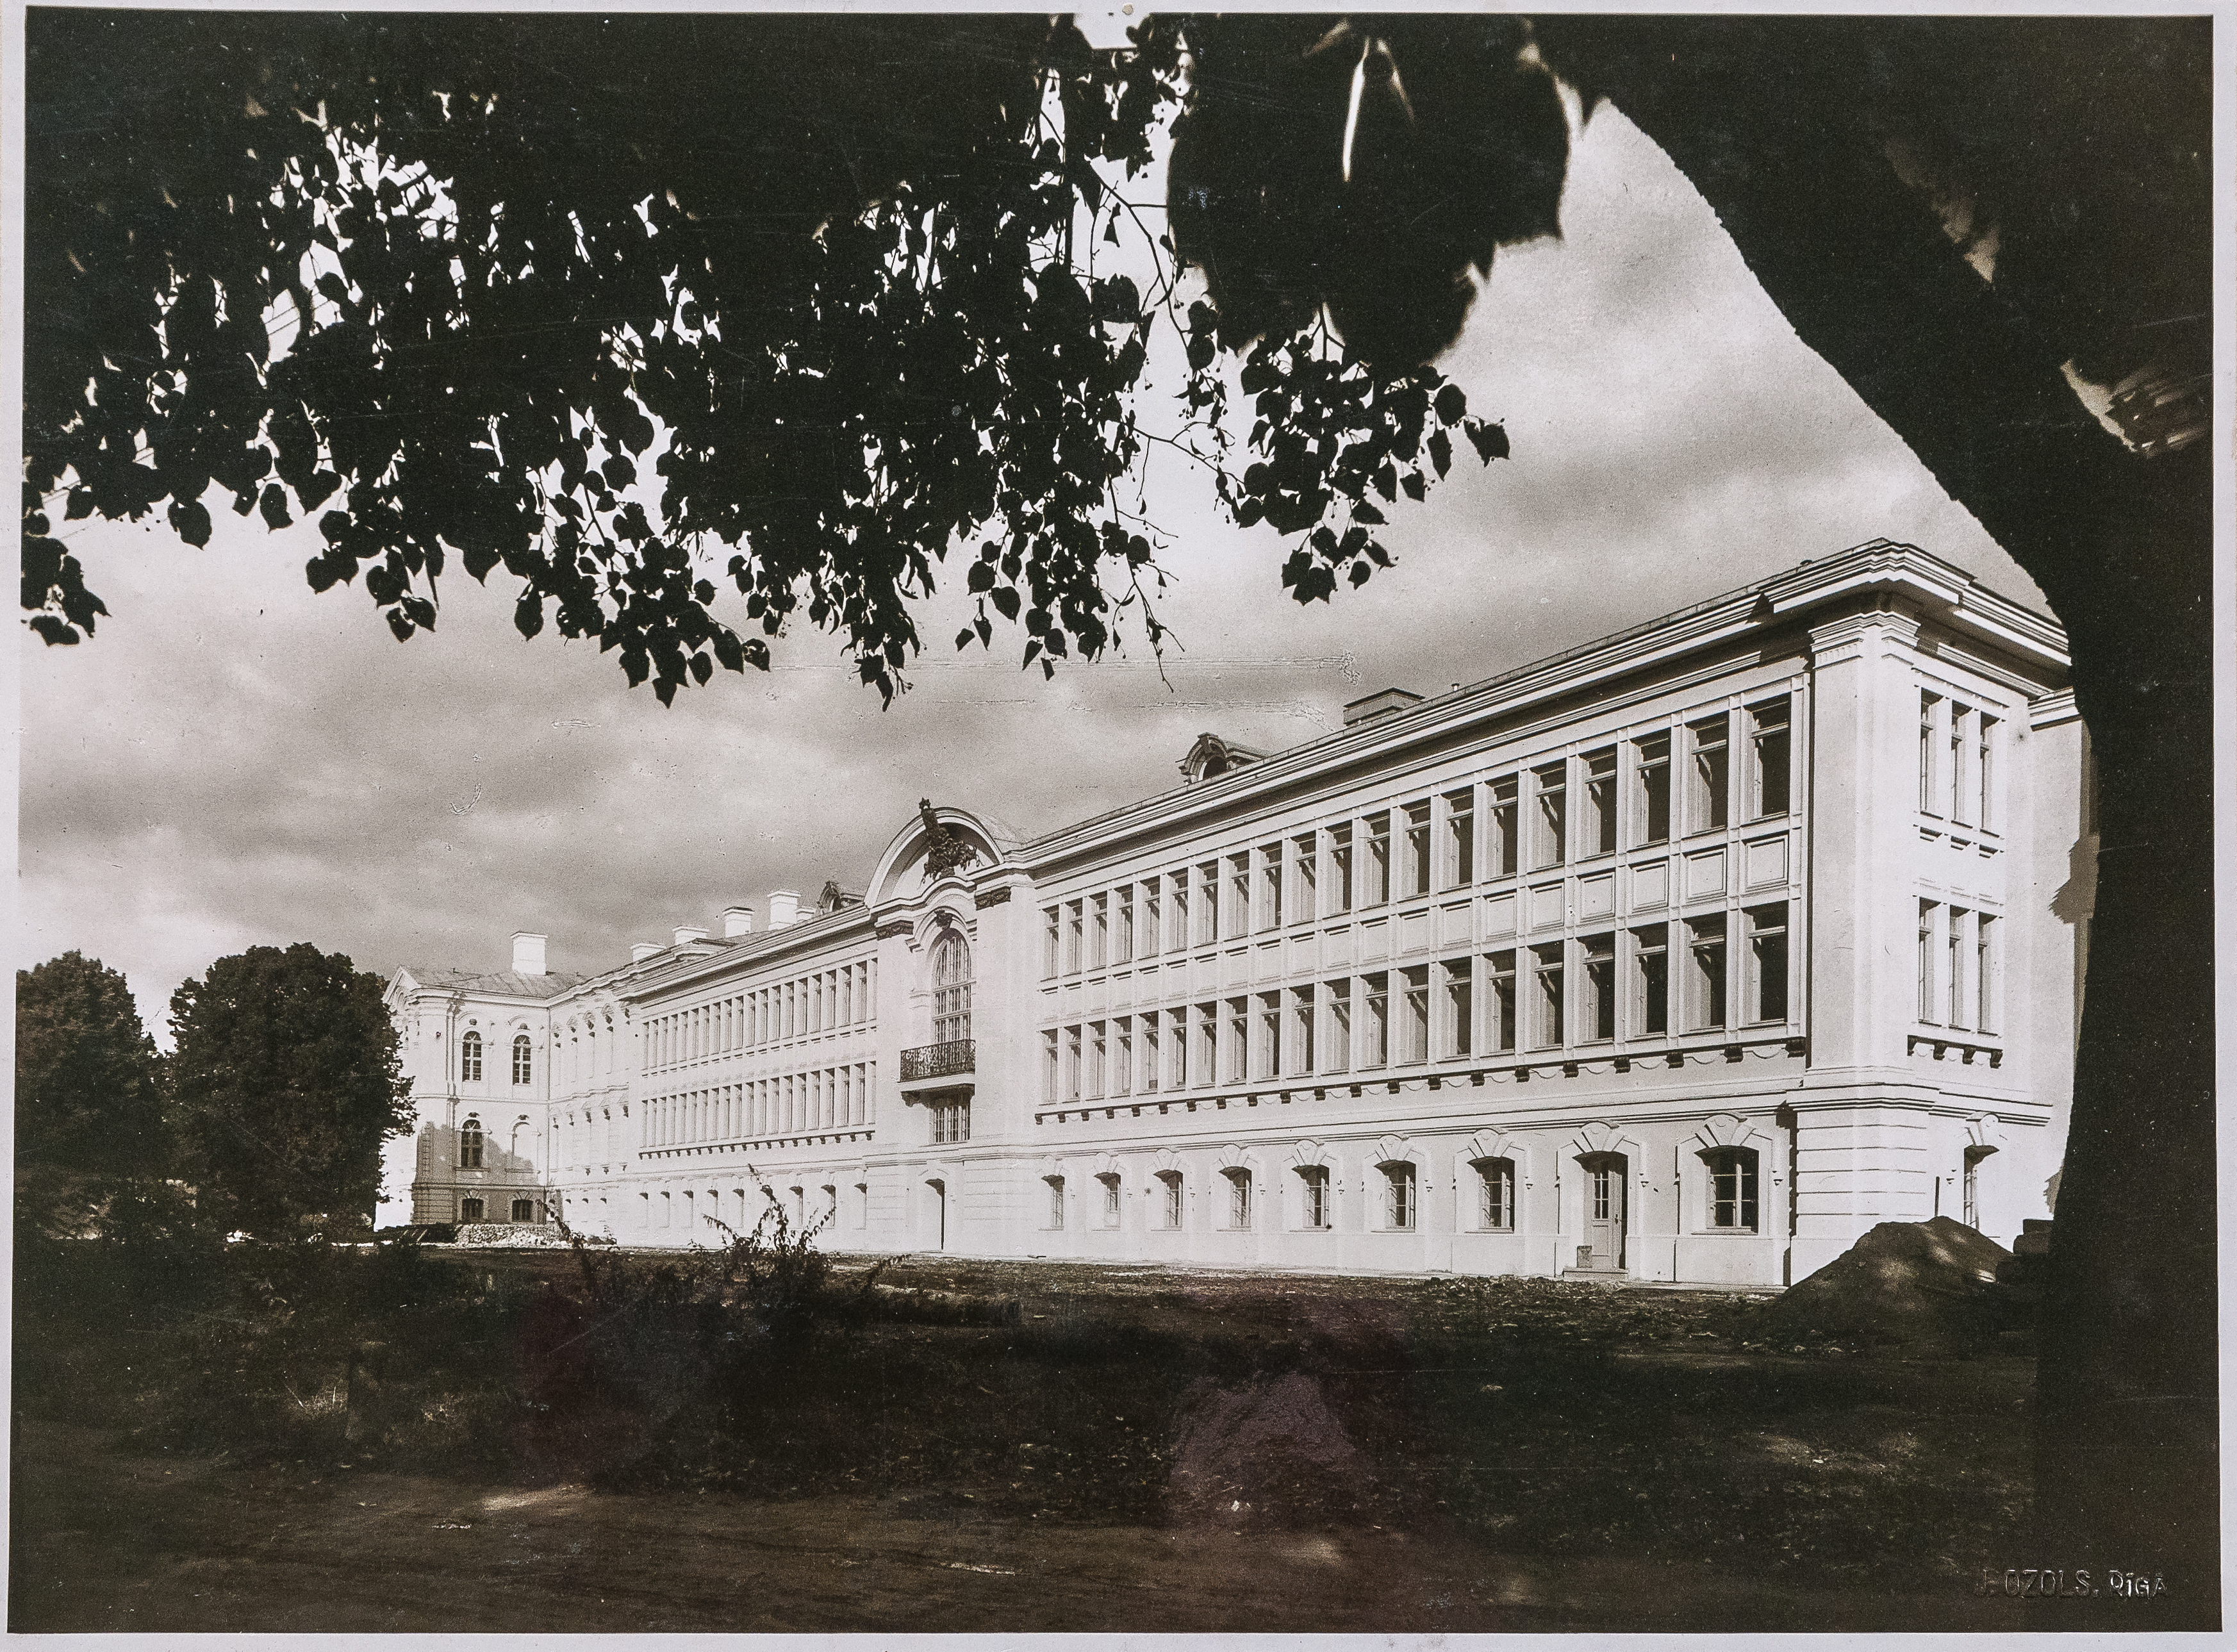 <p style="margin-bottom:11px"><strong>PALACE FROM THE CHANNEL-SIDE</strong></p>  <p>The departments of dairy farming, anatomy and physiology of livestock, as well as of the soil science and animal husbandry were situated on the 1st floor of the building. On the second floor the departments of physics and chemistry were located, as well as several lecture rooms.</p>  <p>Today in these premises the faculties of Information Technology and Agriculture are located.</p>  <p><em>Photo: 1939 Western Wing</em></p>